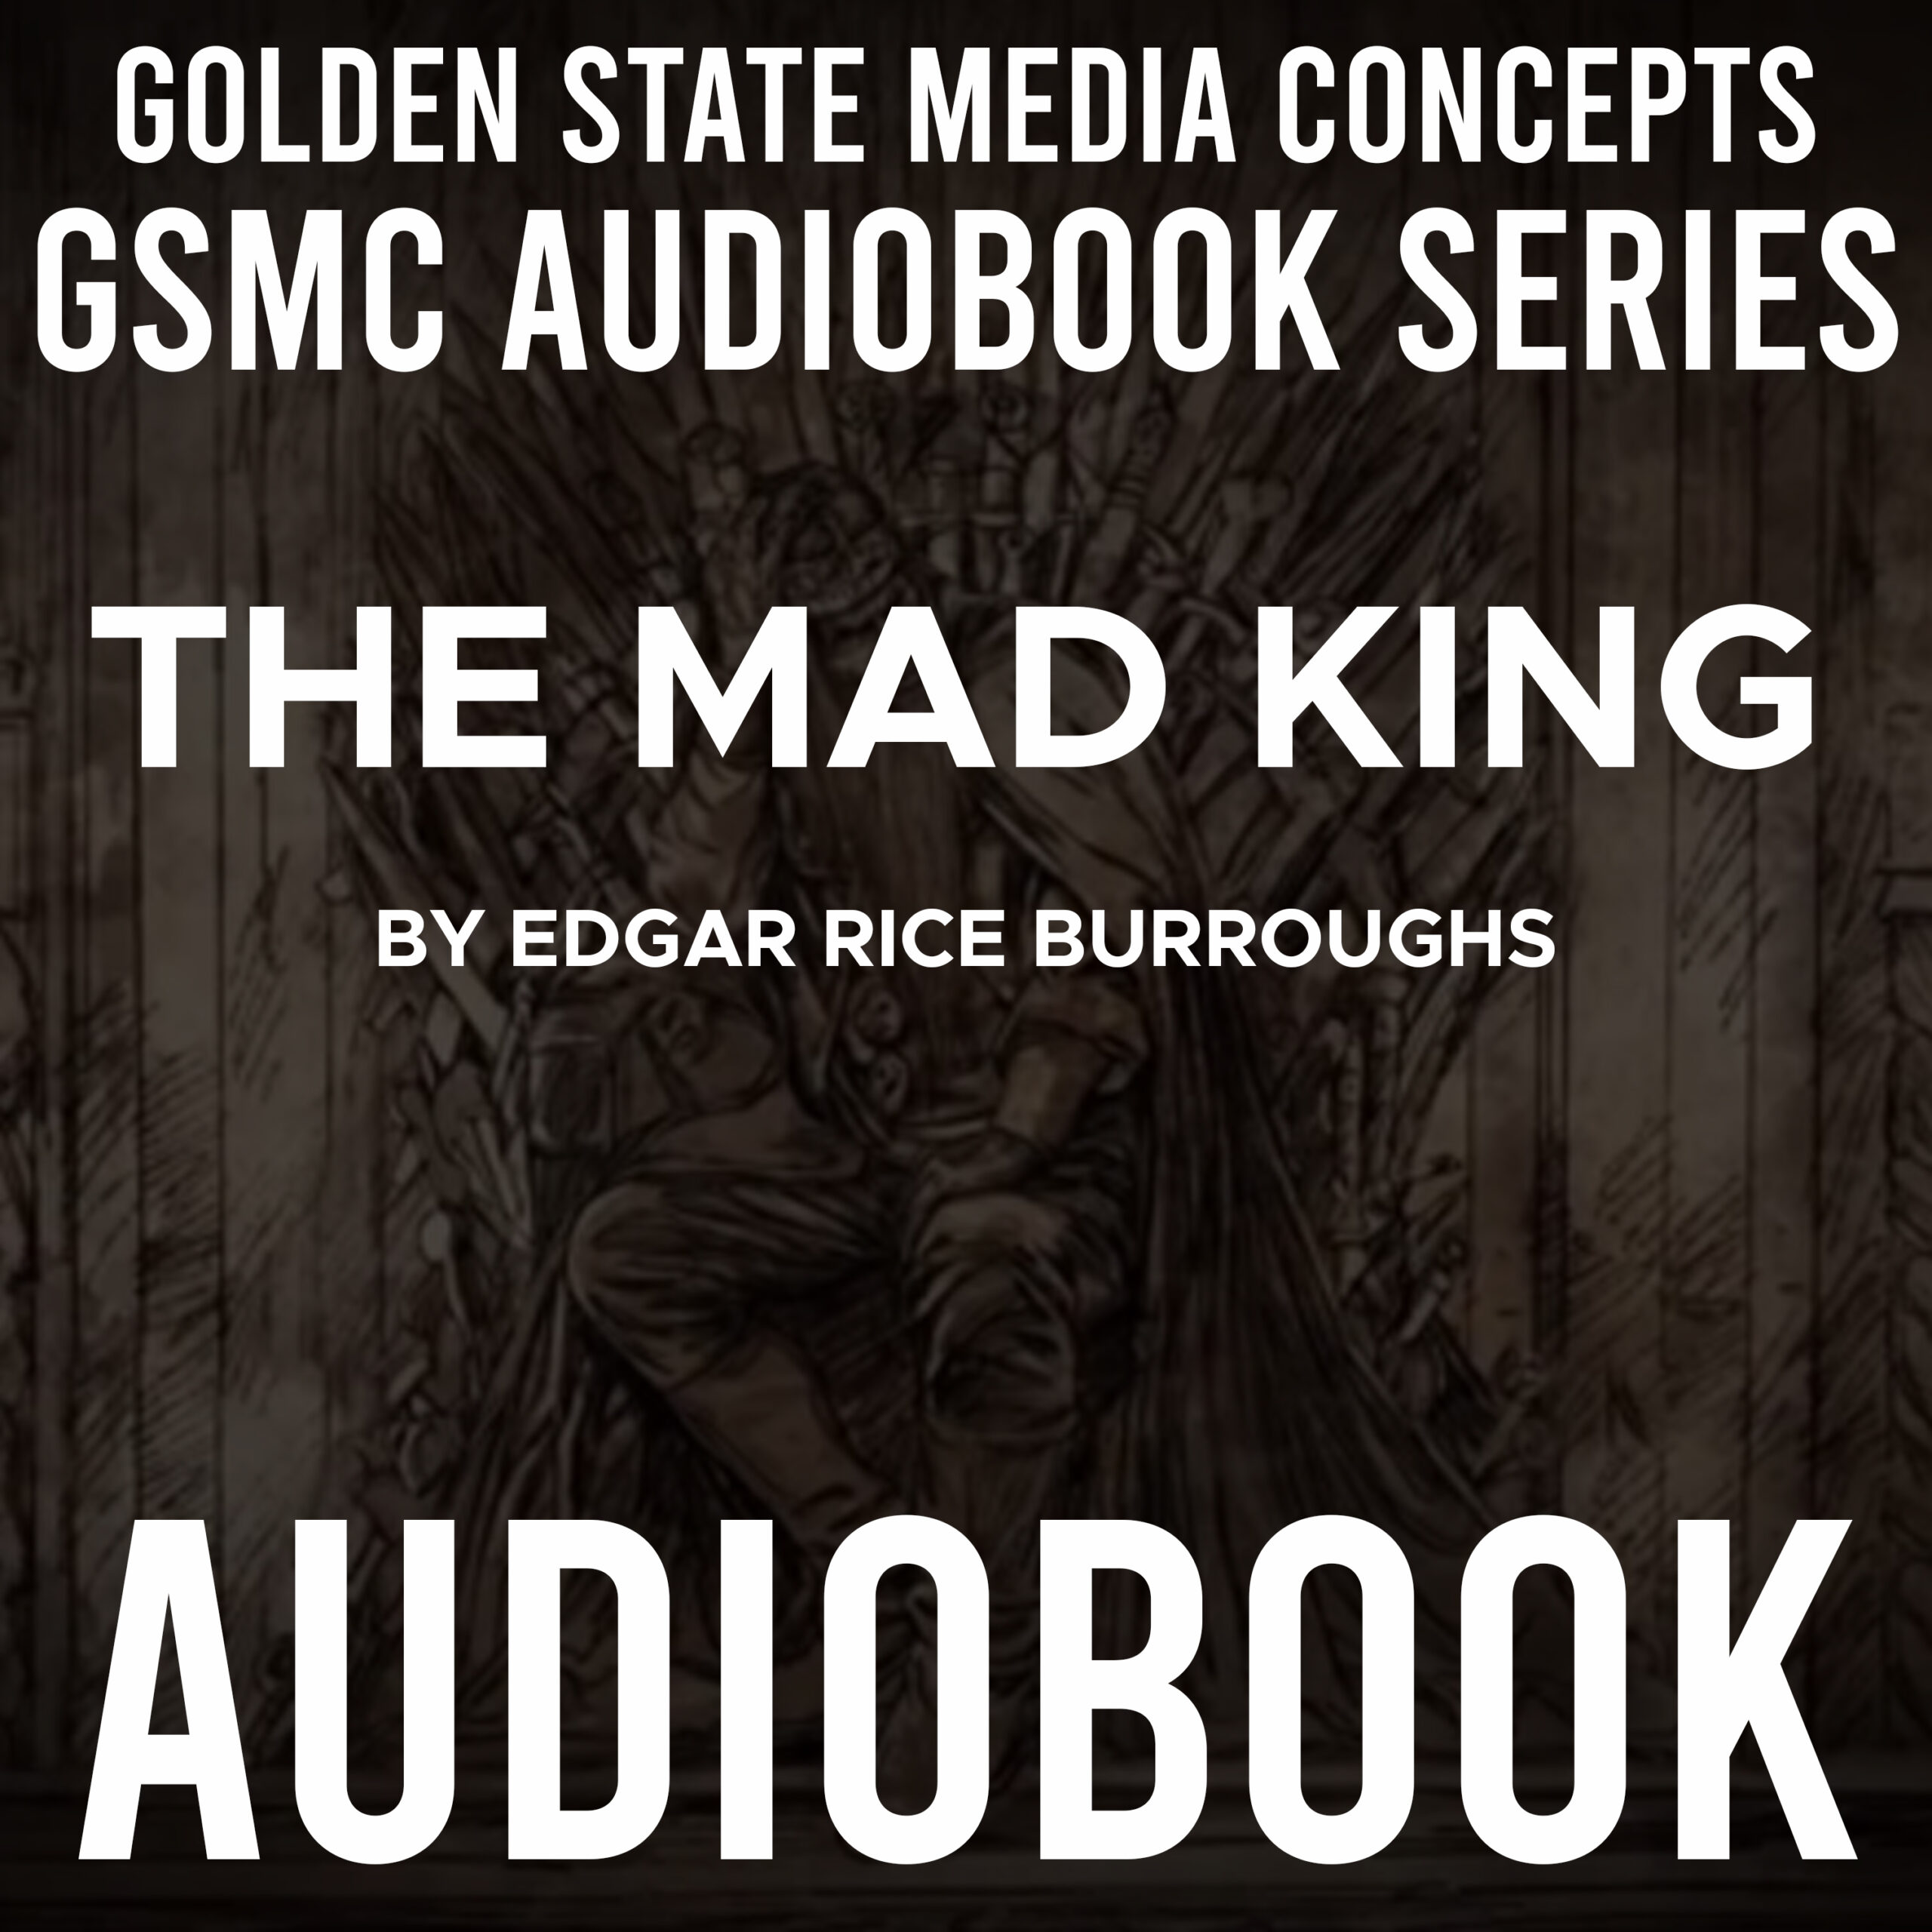 GSMC Audiobook Series: The Mad King